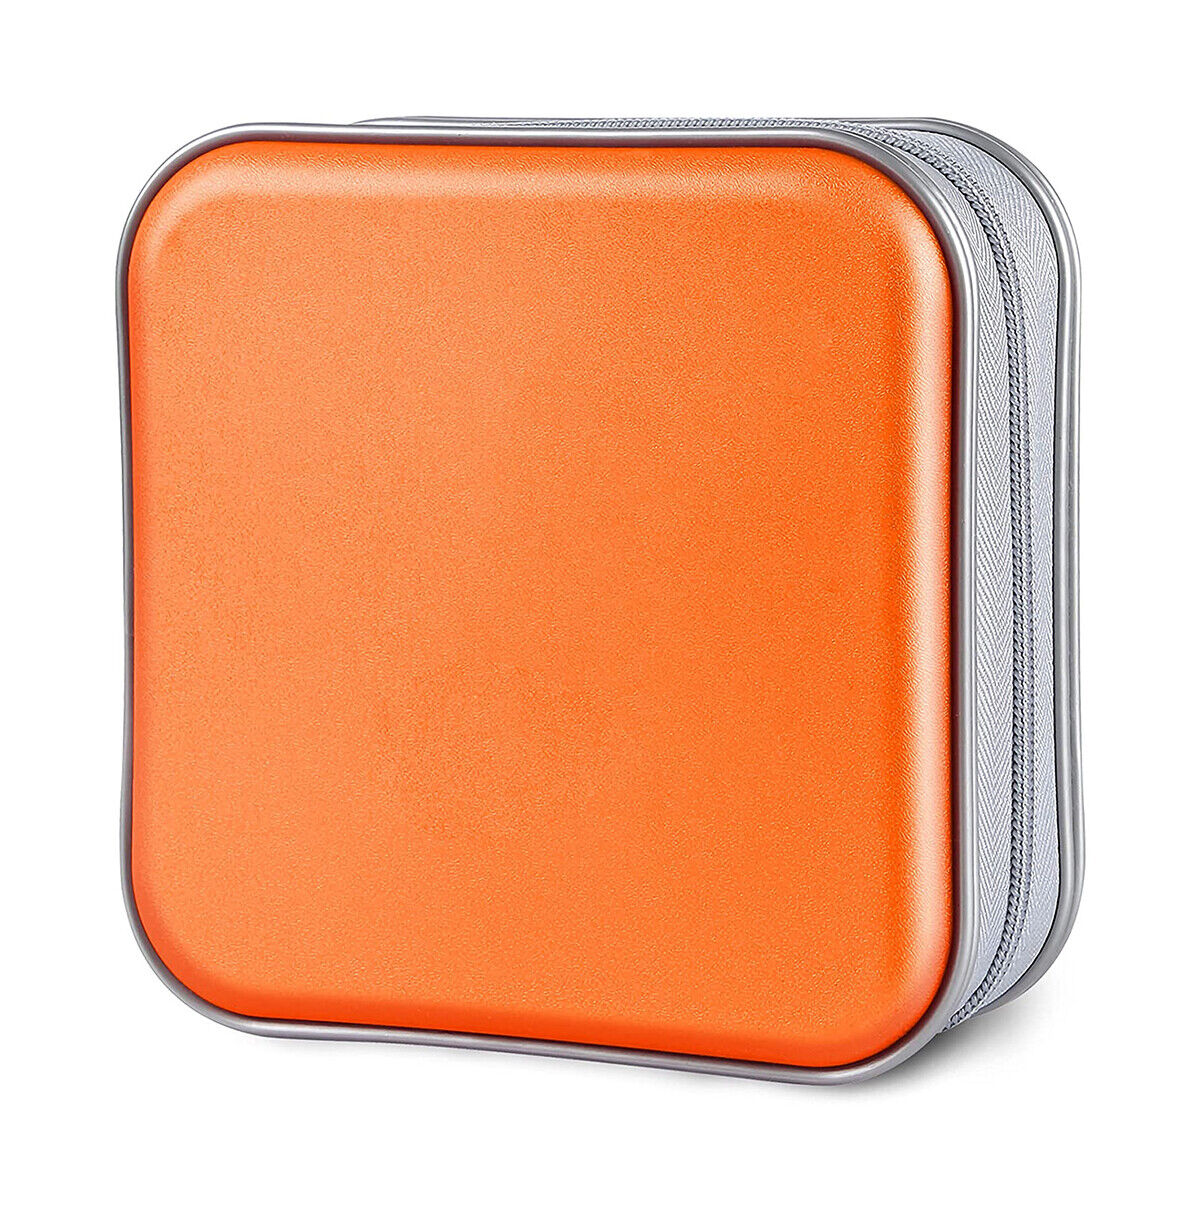 40 Disc CD Case Orange Organizer S 2021 spring and summer new DVD Holder Portable Phoenix Mall Carry VCD